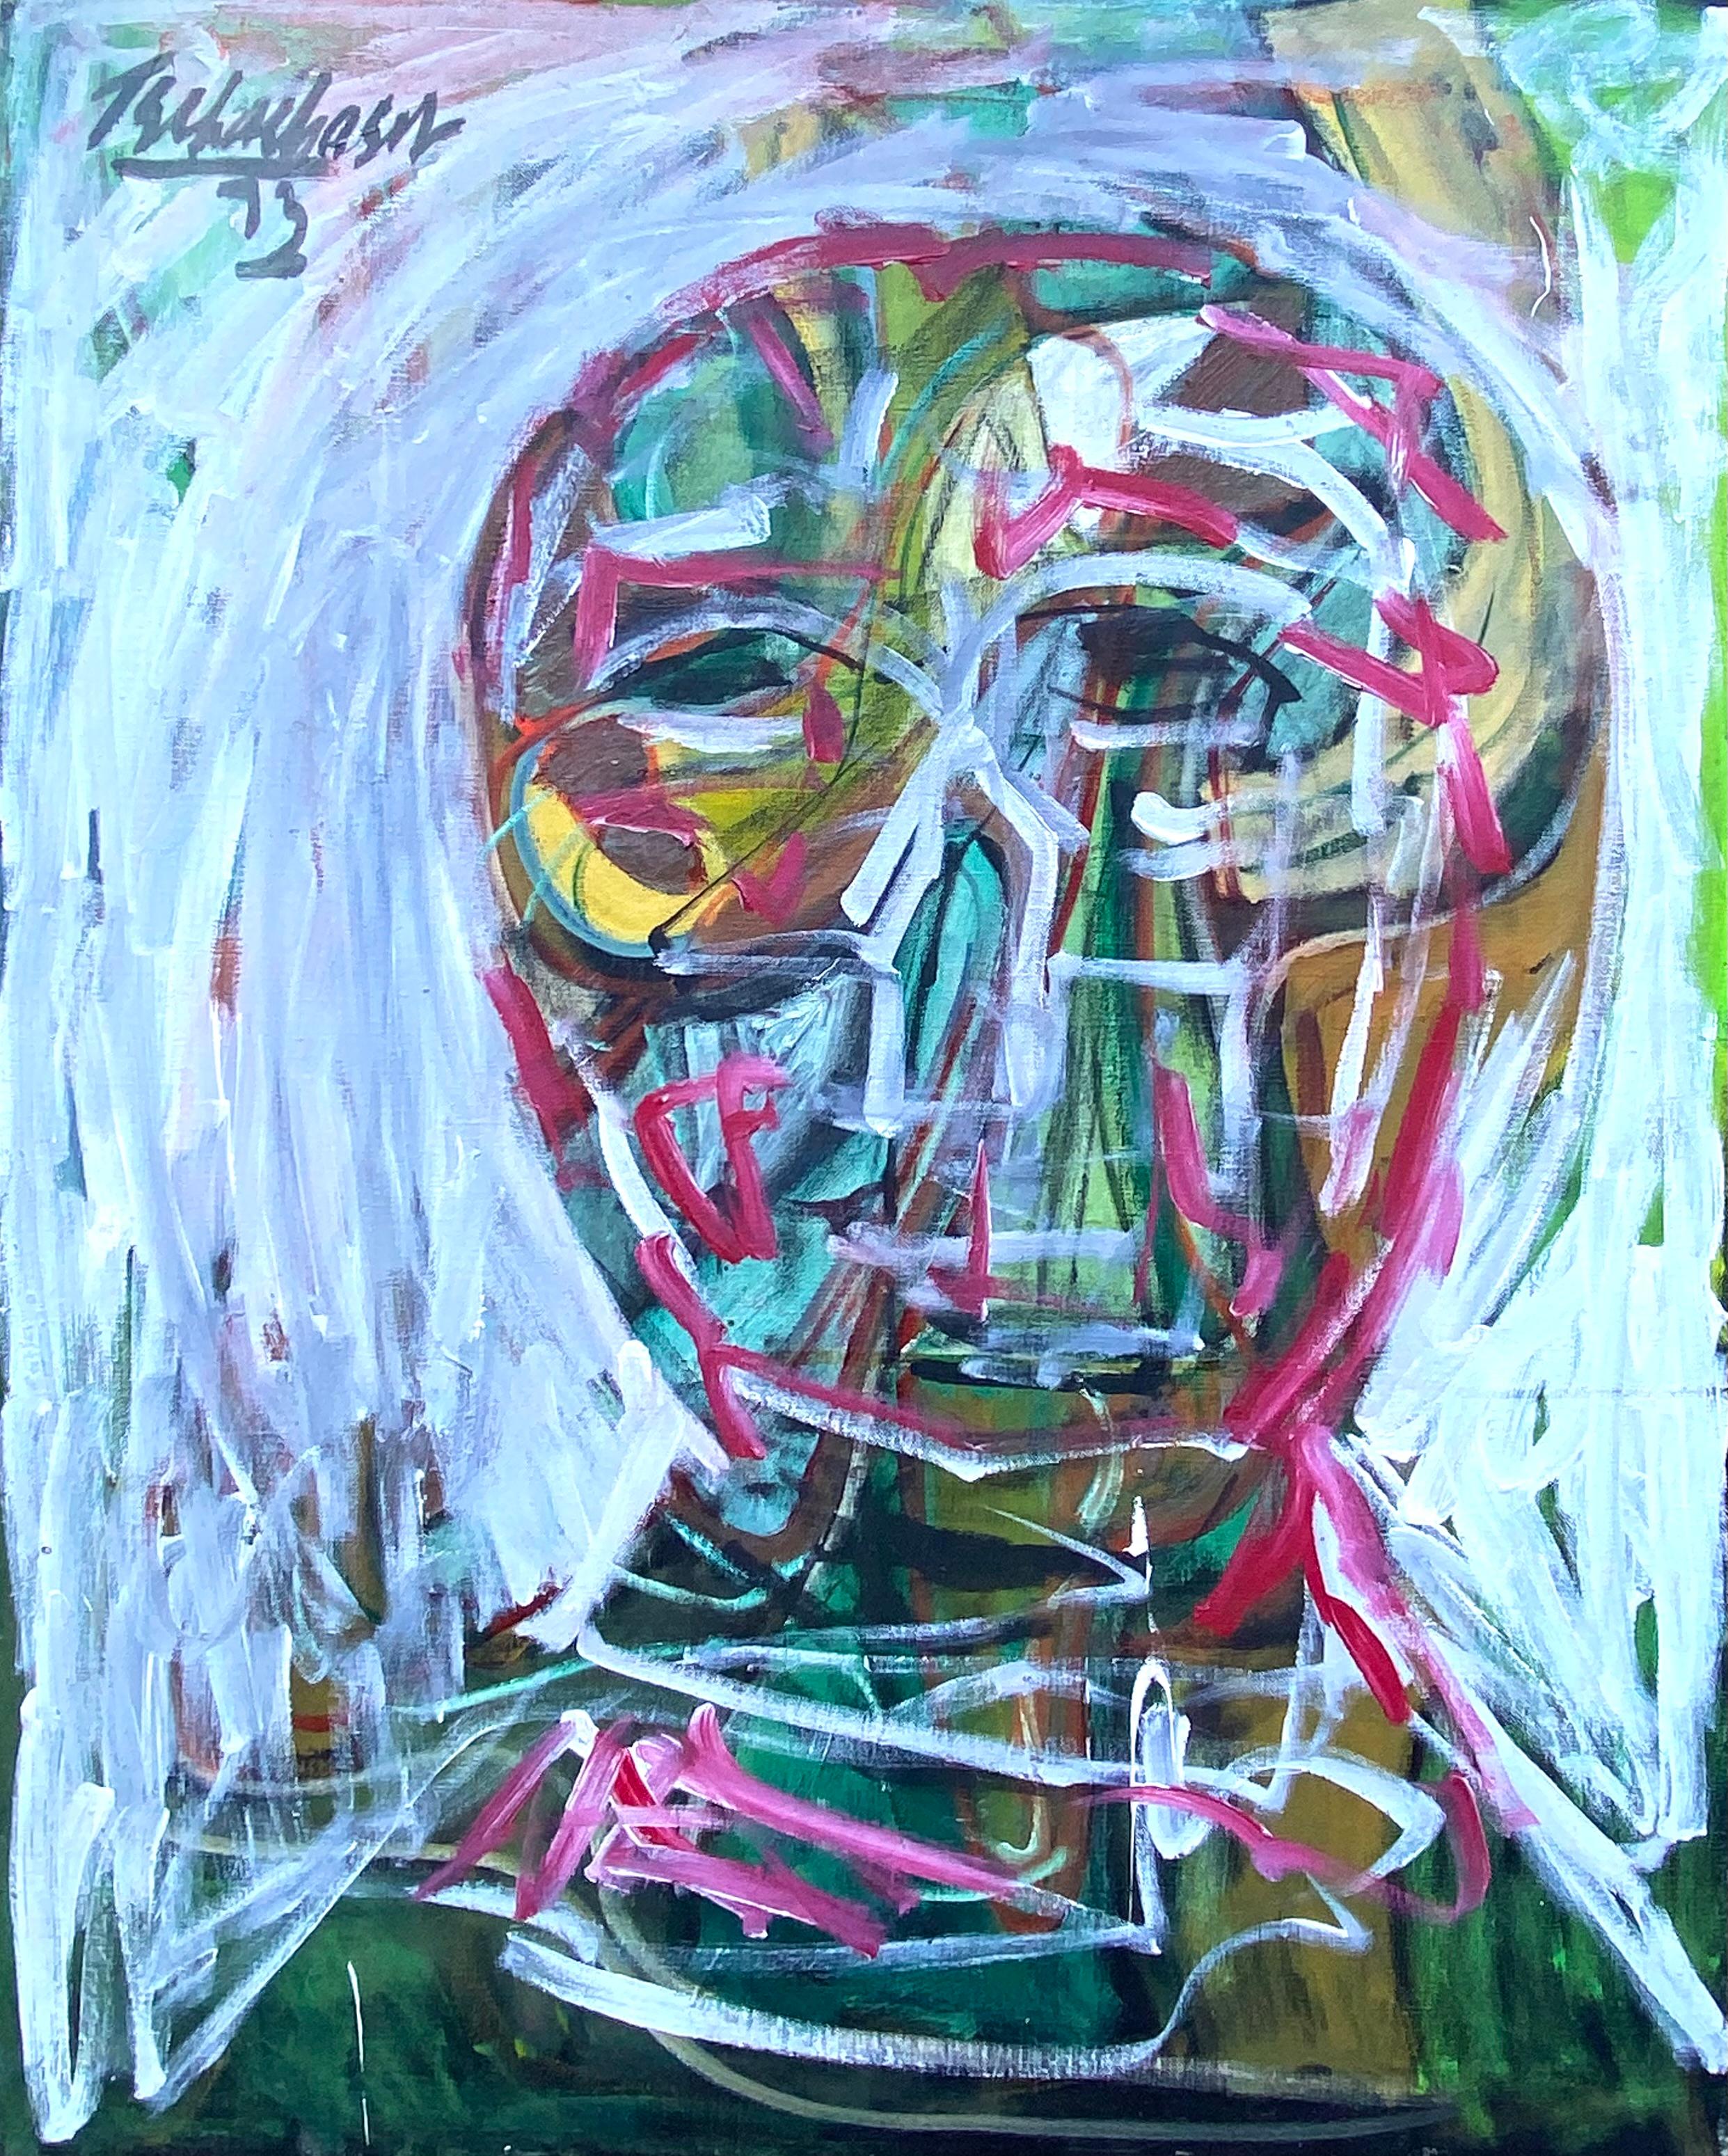 “Abstract Self Portrait